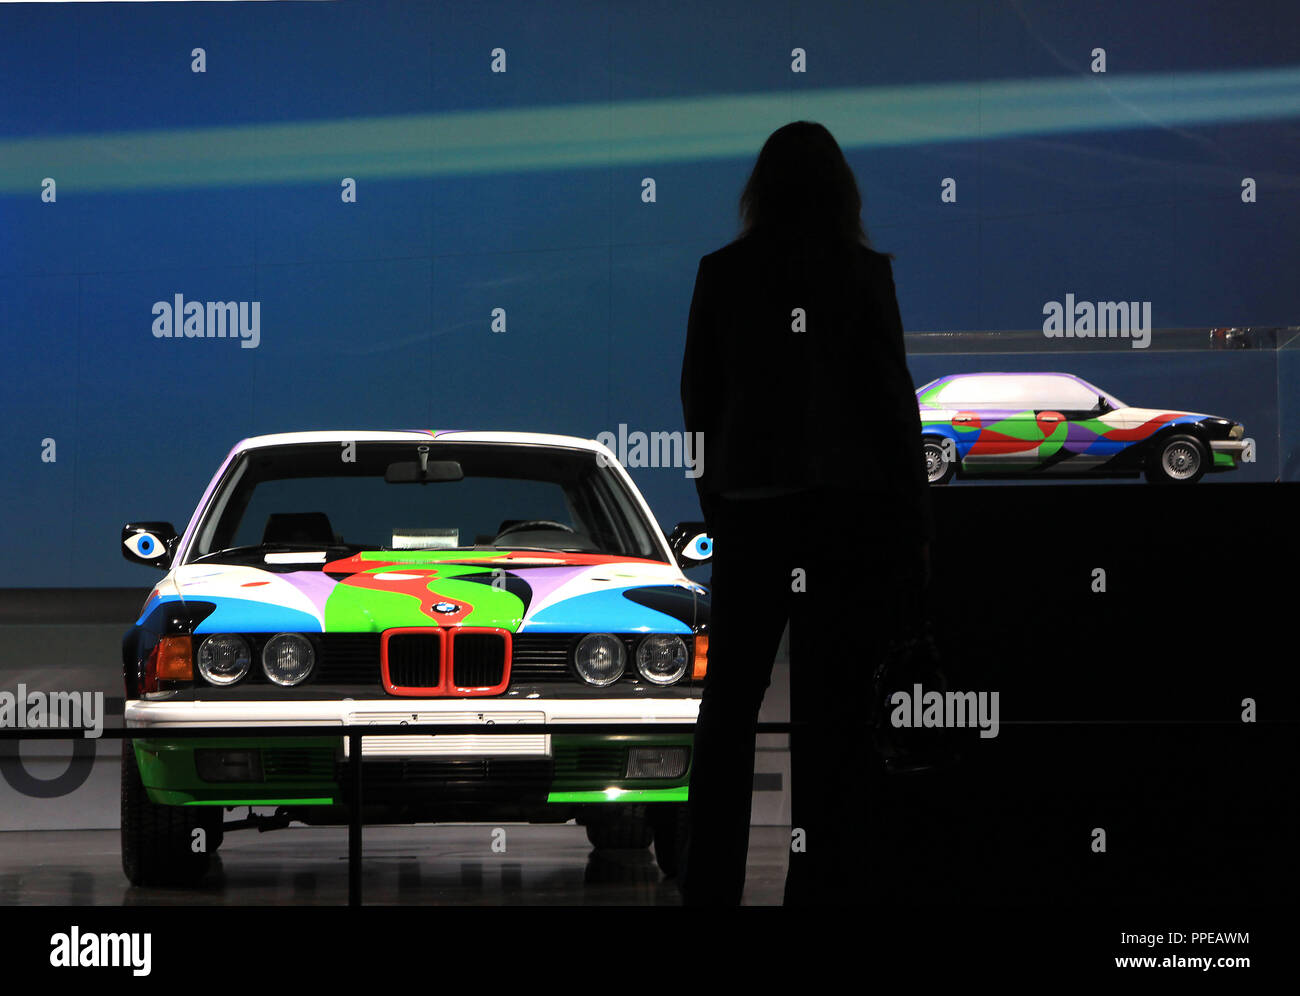 The special exhibition 'Art Cars' at the BMW Museum in Munich, with works by Andy Warhol, Jenny Holzer, Roy Lichtenstein, Frank Stella and others. Stock Photo